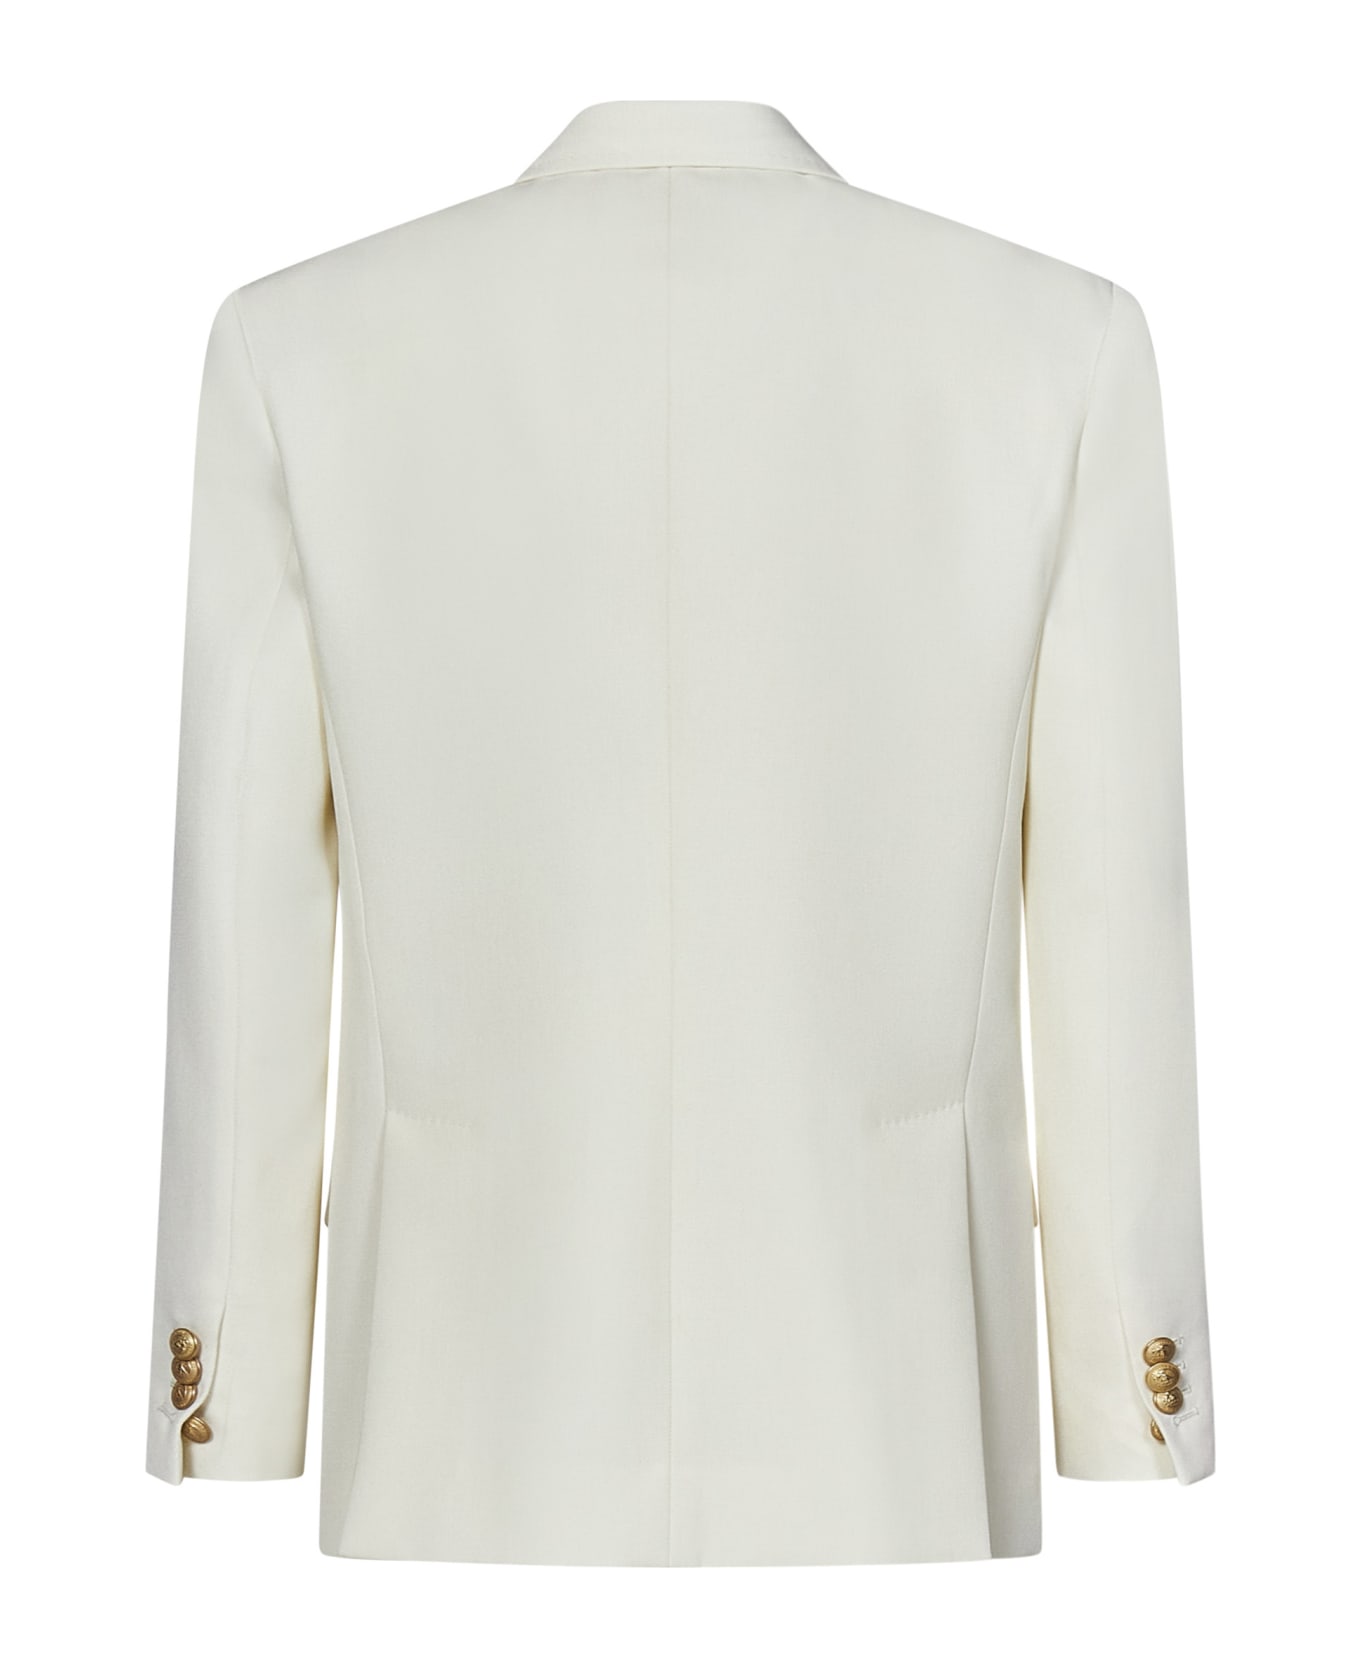 Dsquared2 Palm Beach Double-breasted Blazer - White ブレザー